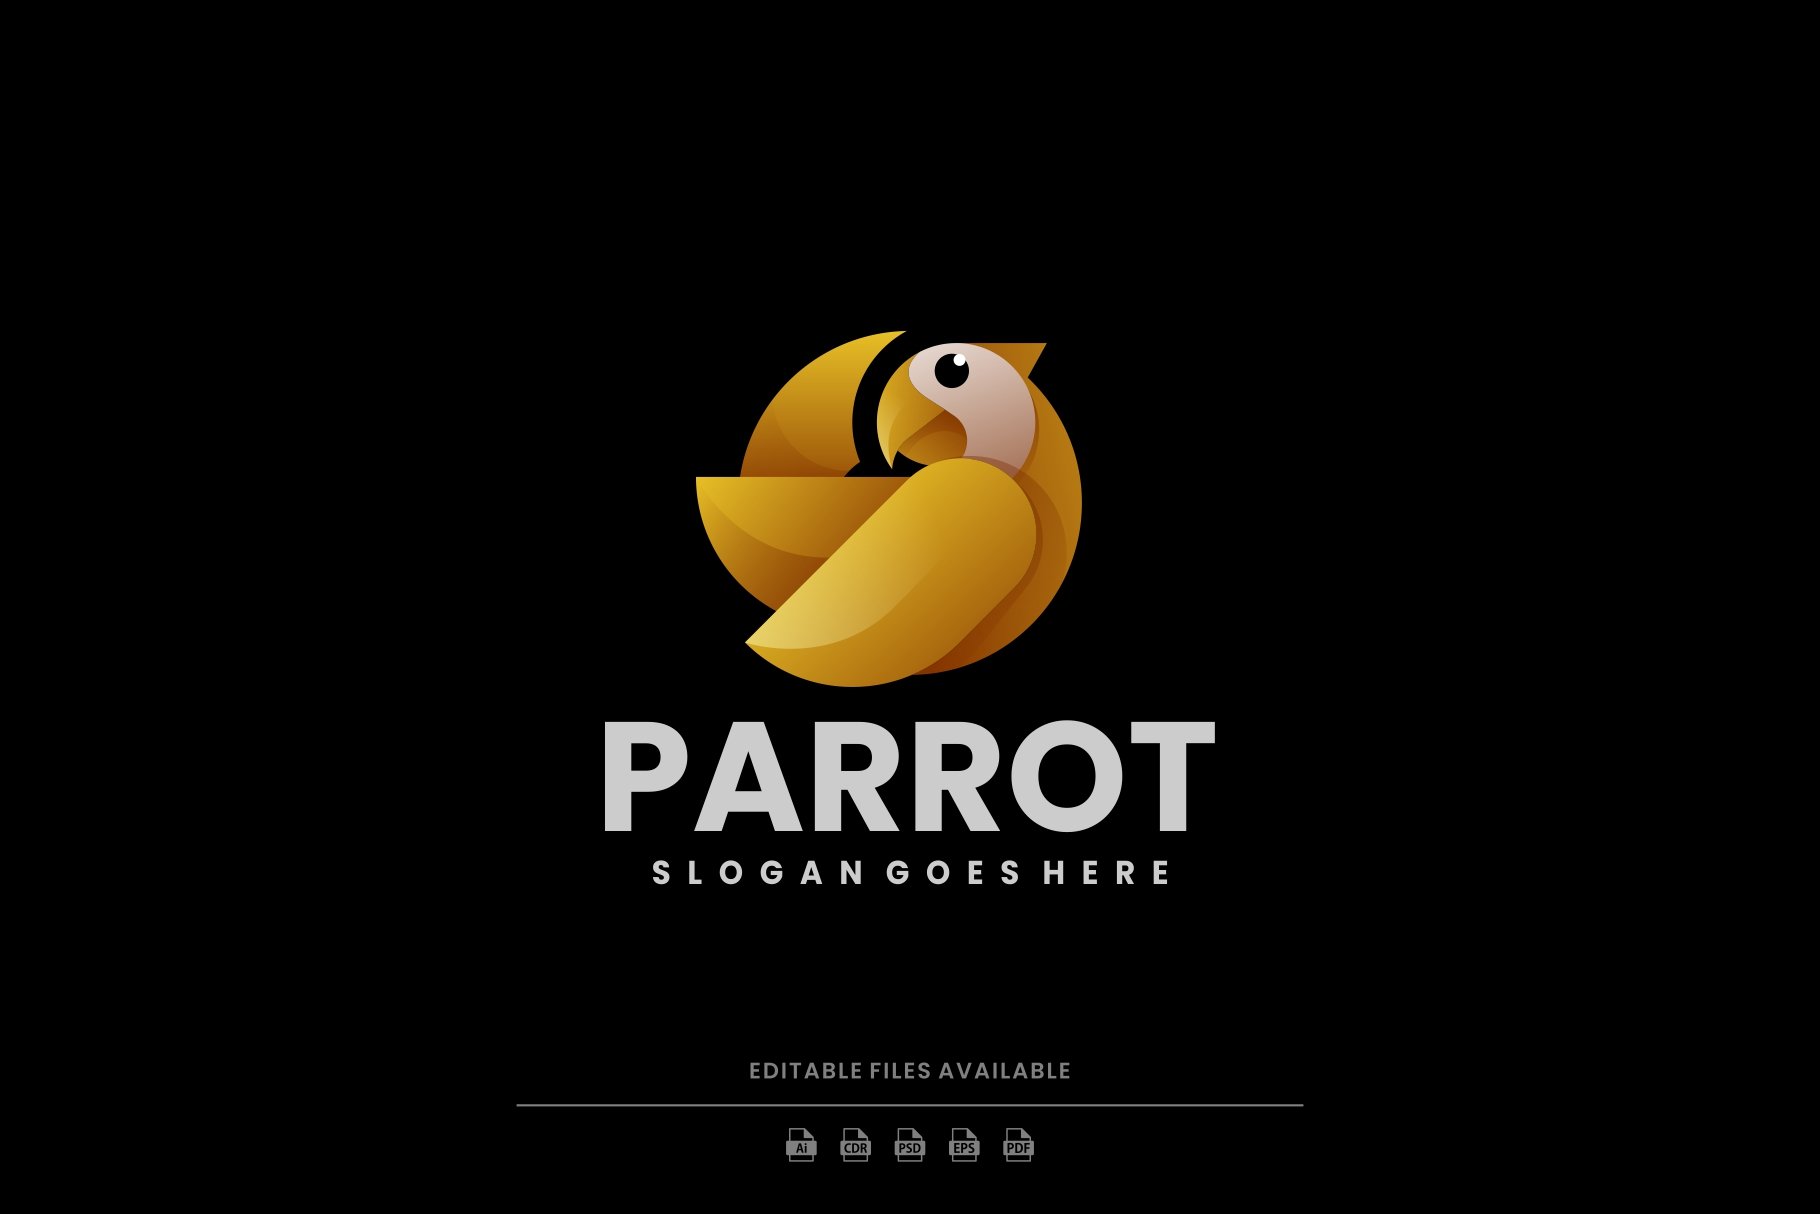 Parrot Colorful Logo cover image.